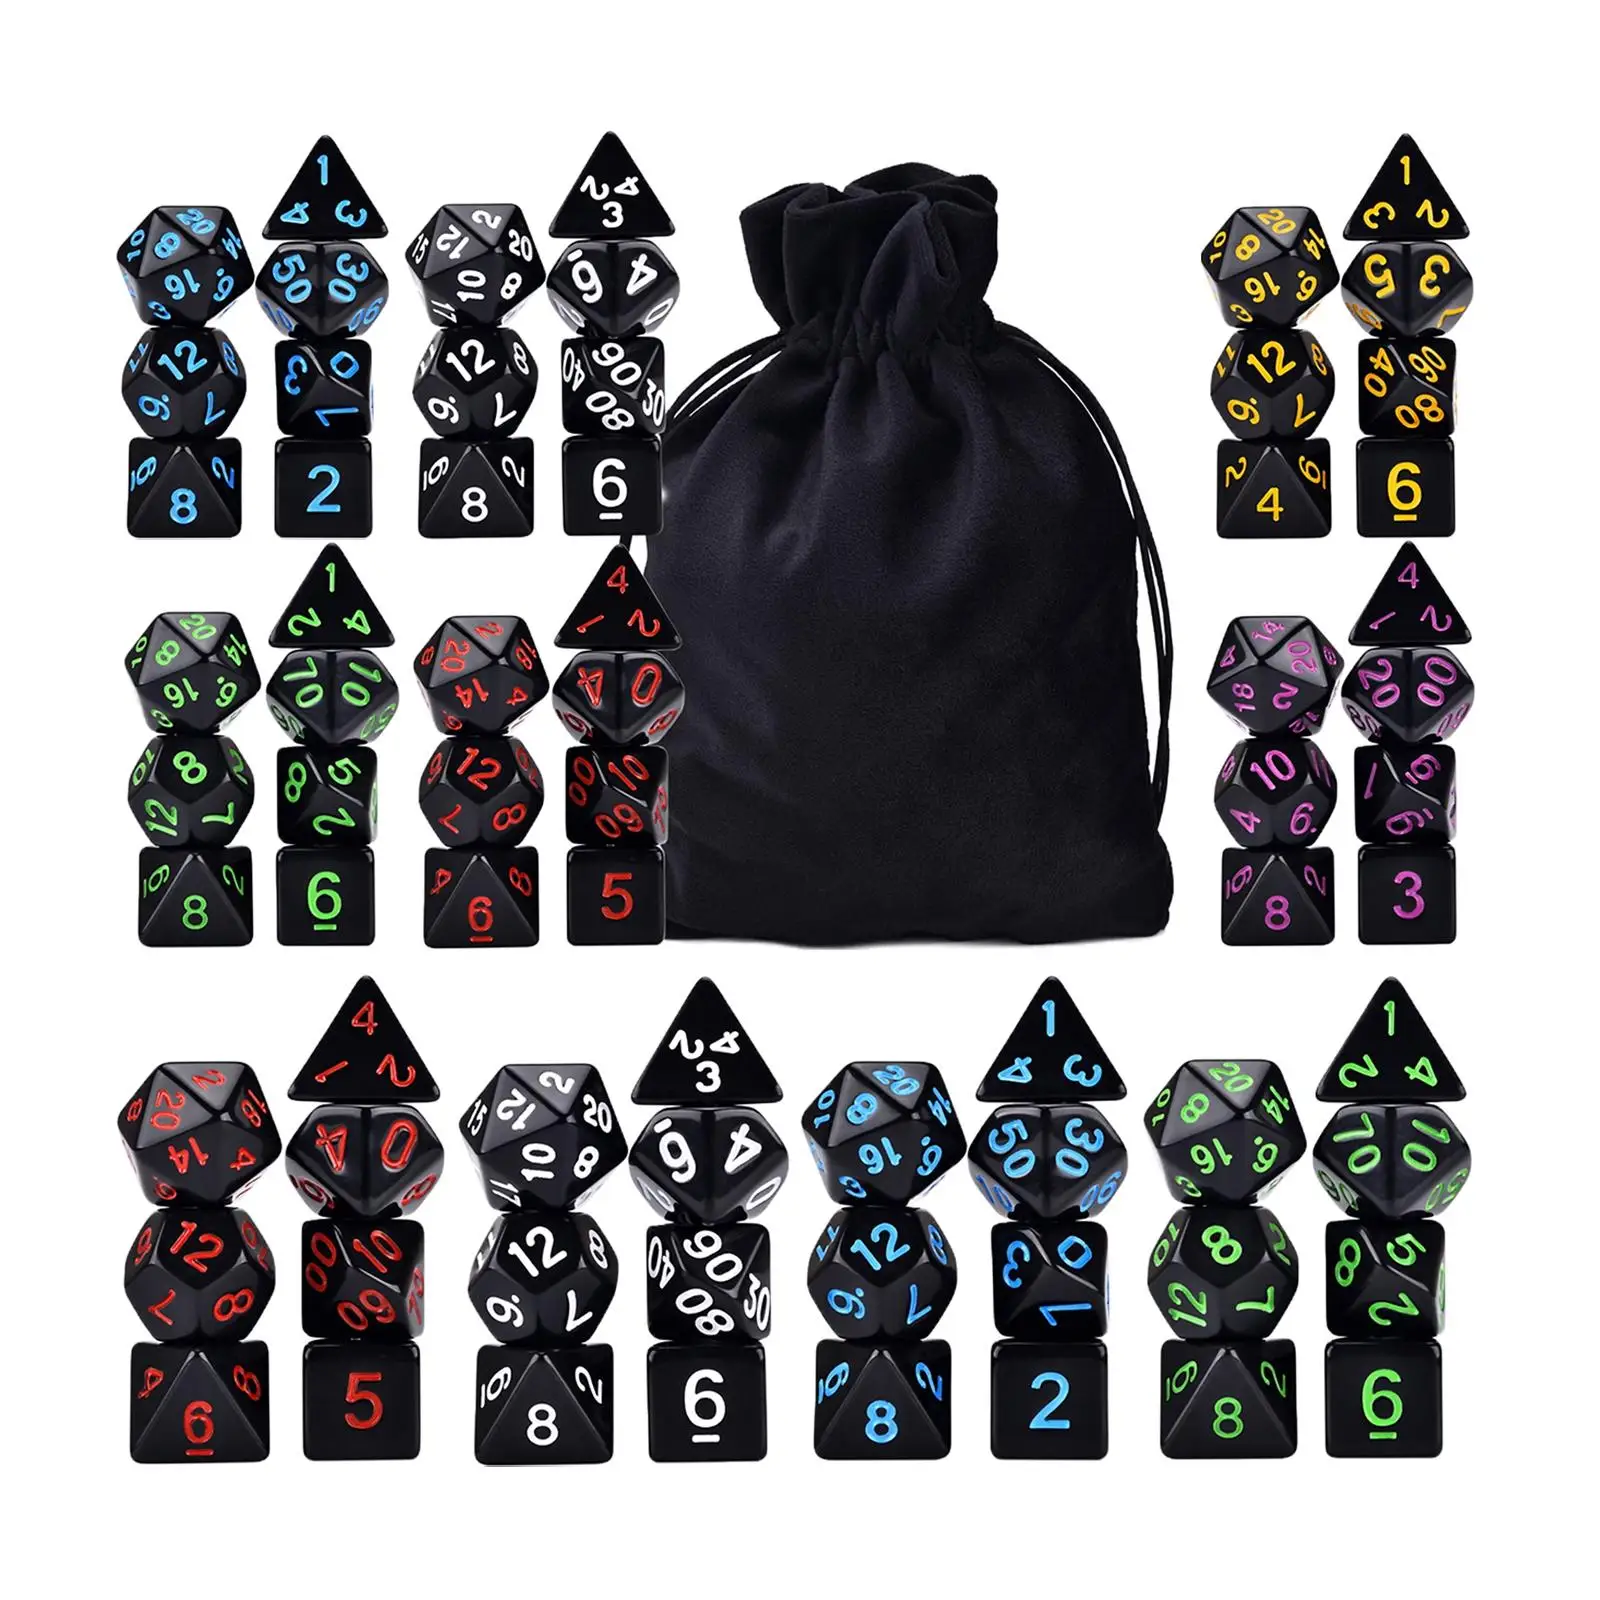 70Pcs Acrylic Polyhedral Dice Set Double Colors D4-D20 with Storage Bag for Role Playing MTG DND Math Teaching Table Games